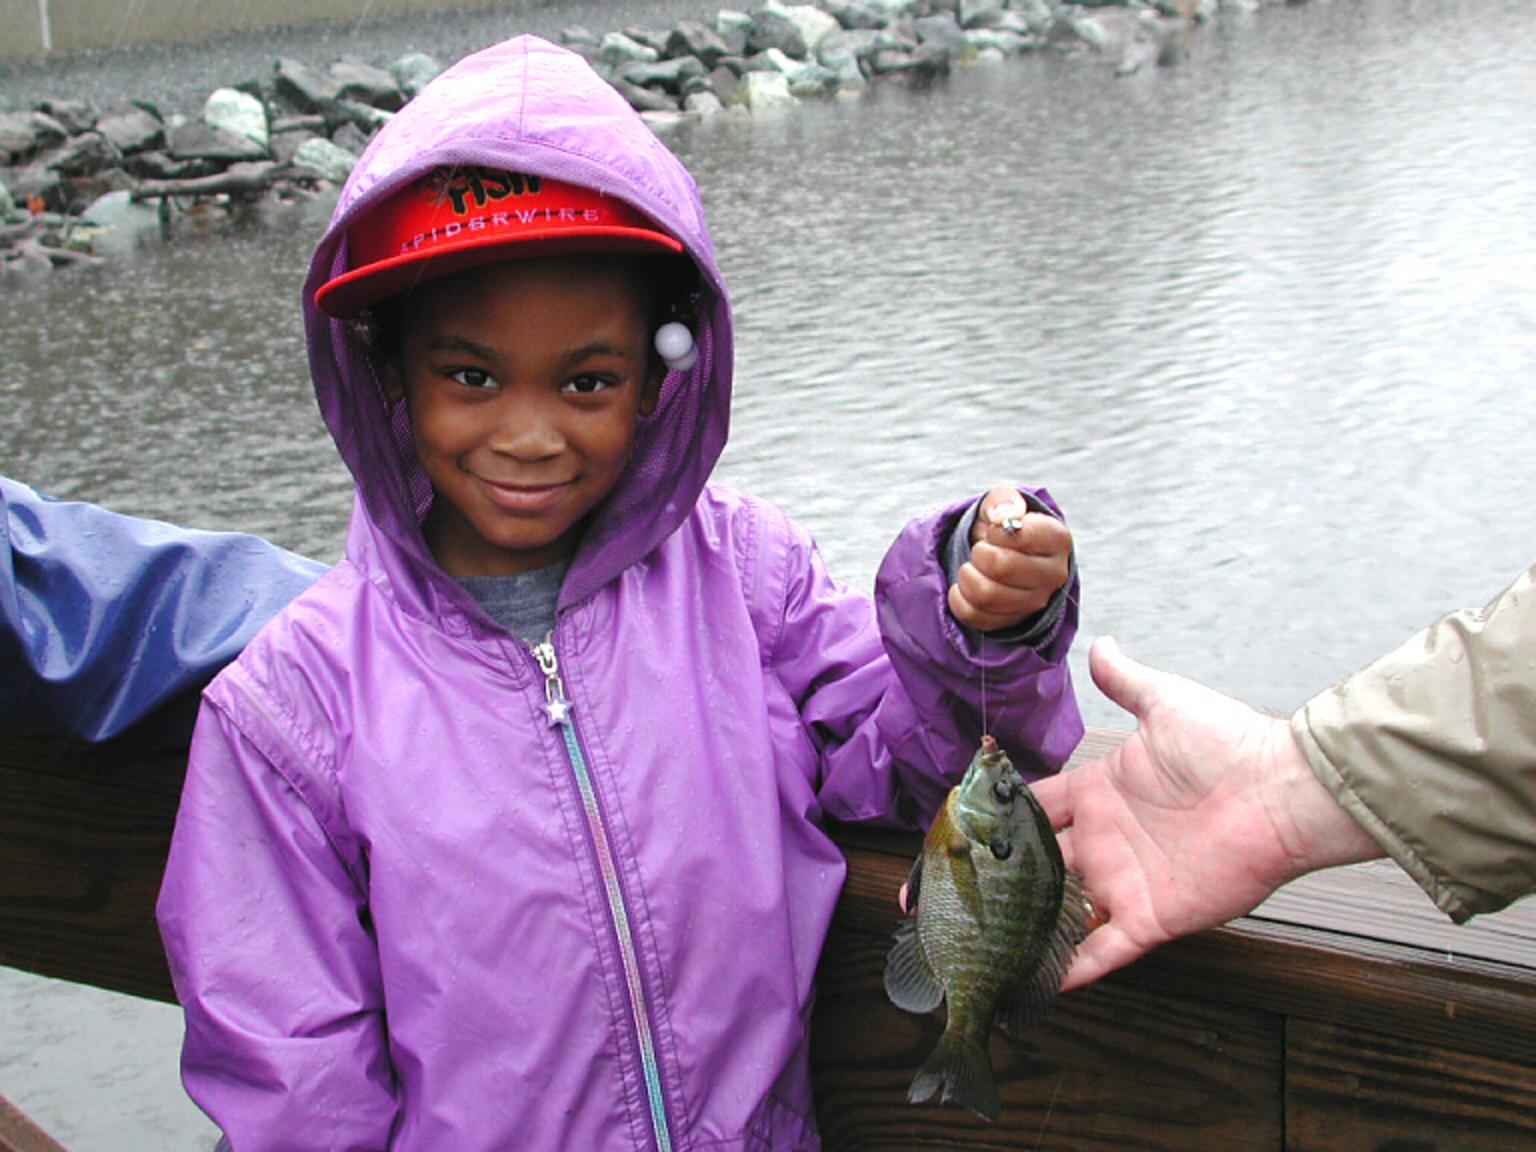 Free picture: young, African, American, girl, smile, holding, fishing, catch